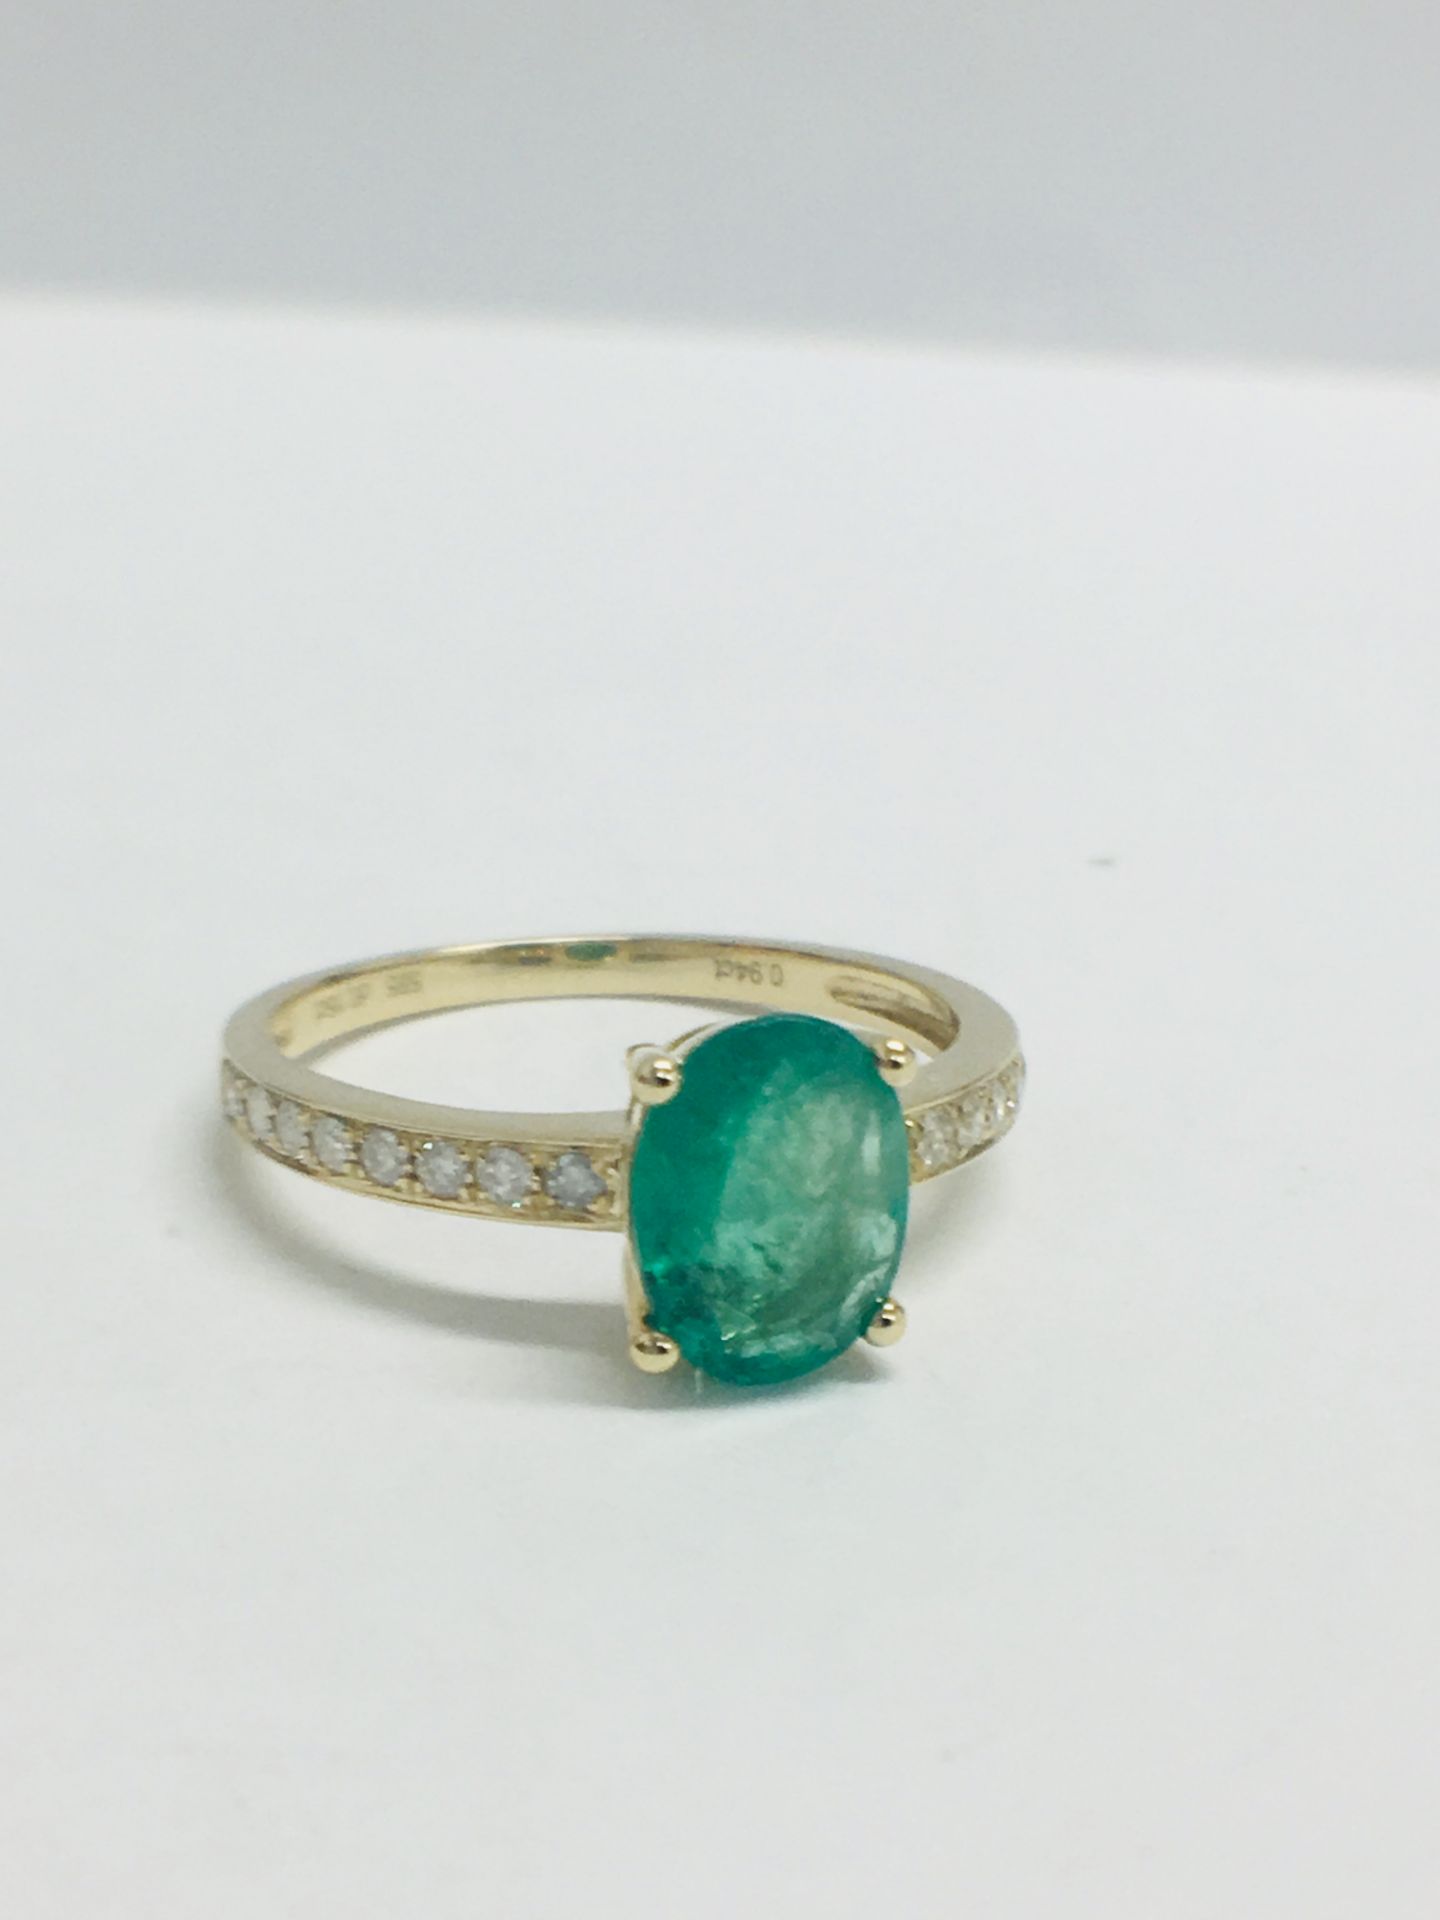 14ct Yellow Gold Emerald and Diamond Ring - Image 2 of 7